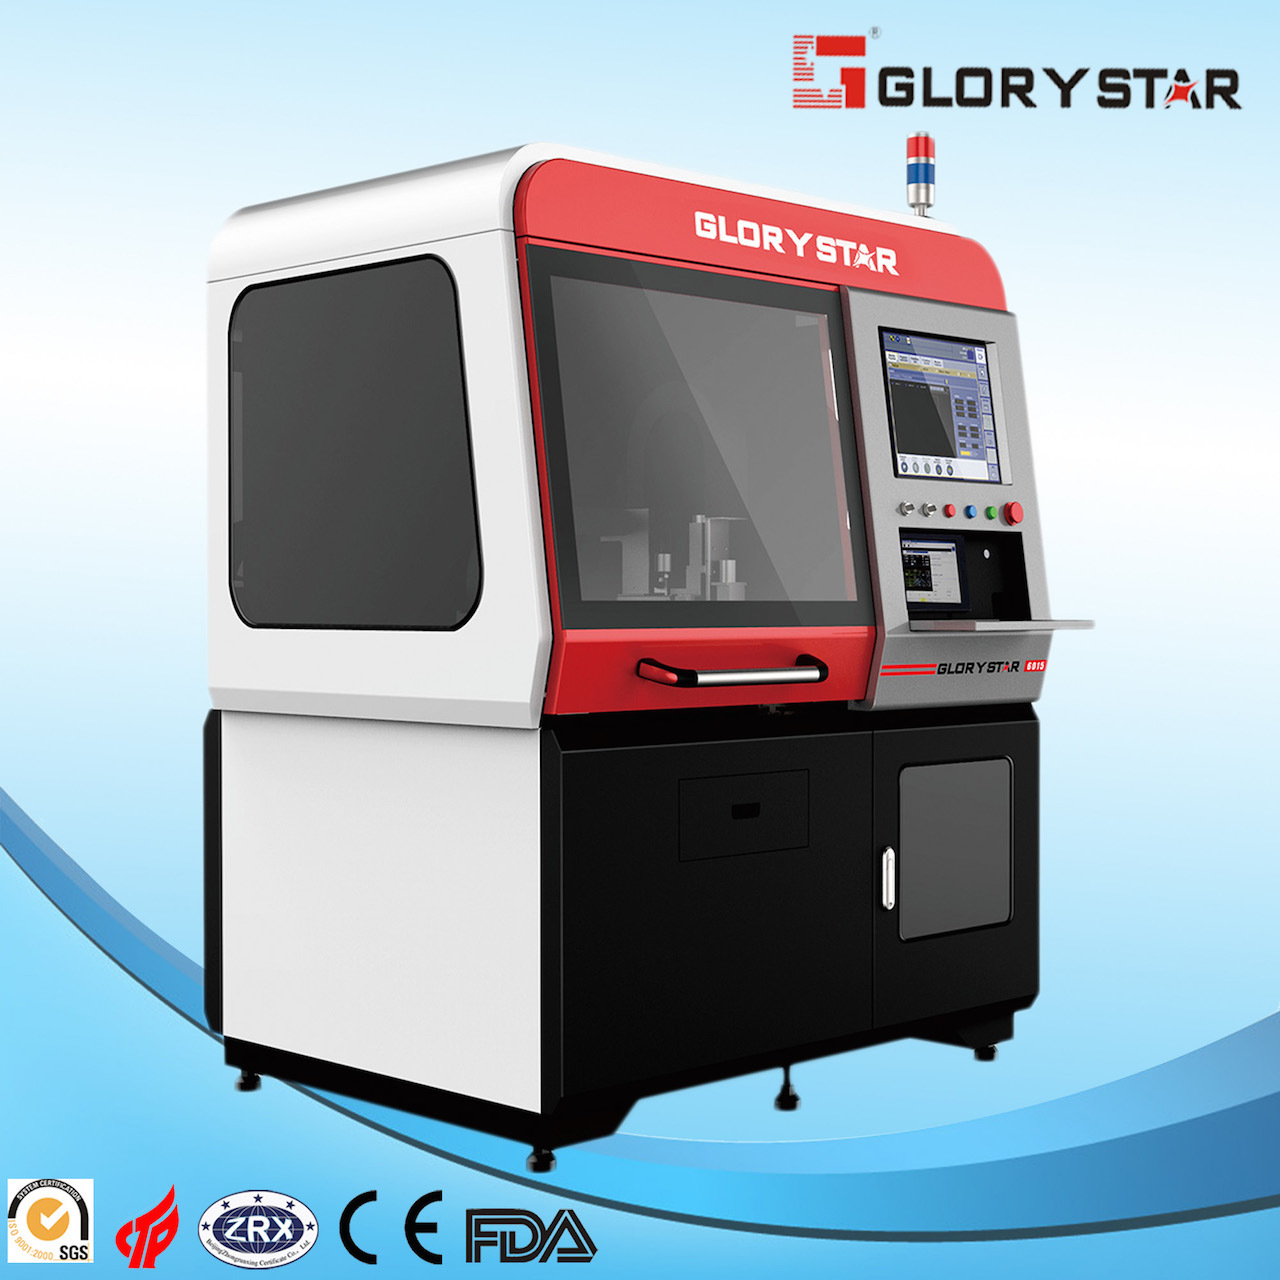 [Glorystar] Small Laser Cutting Machine for Mobile Phone Parts